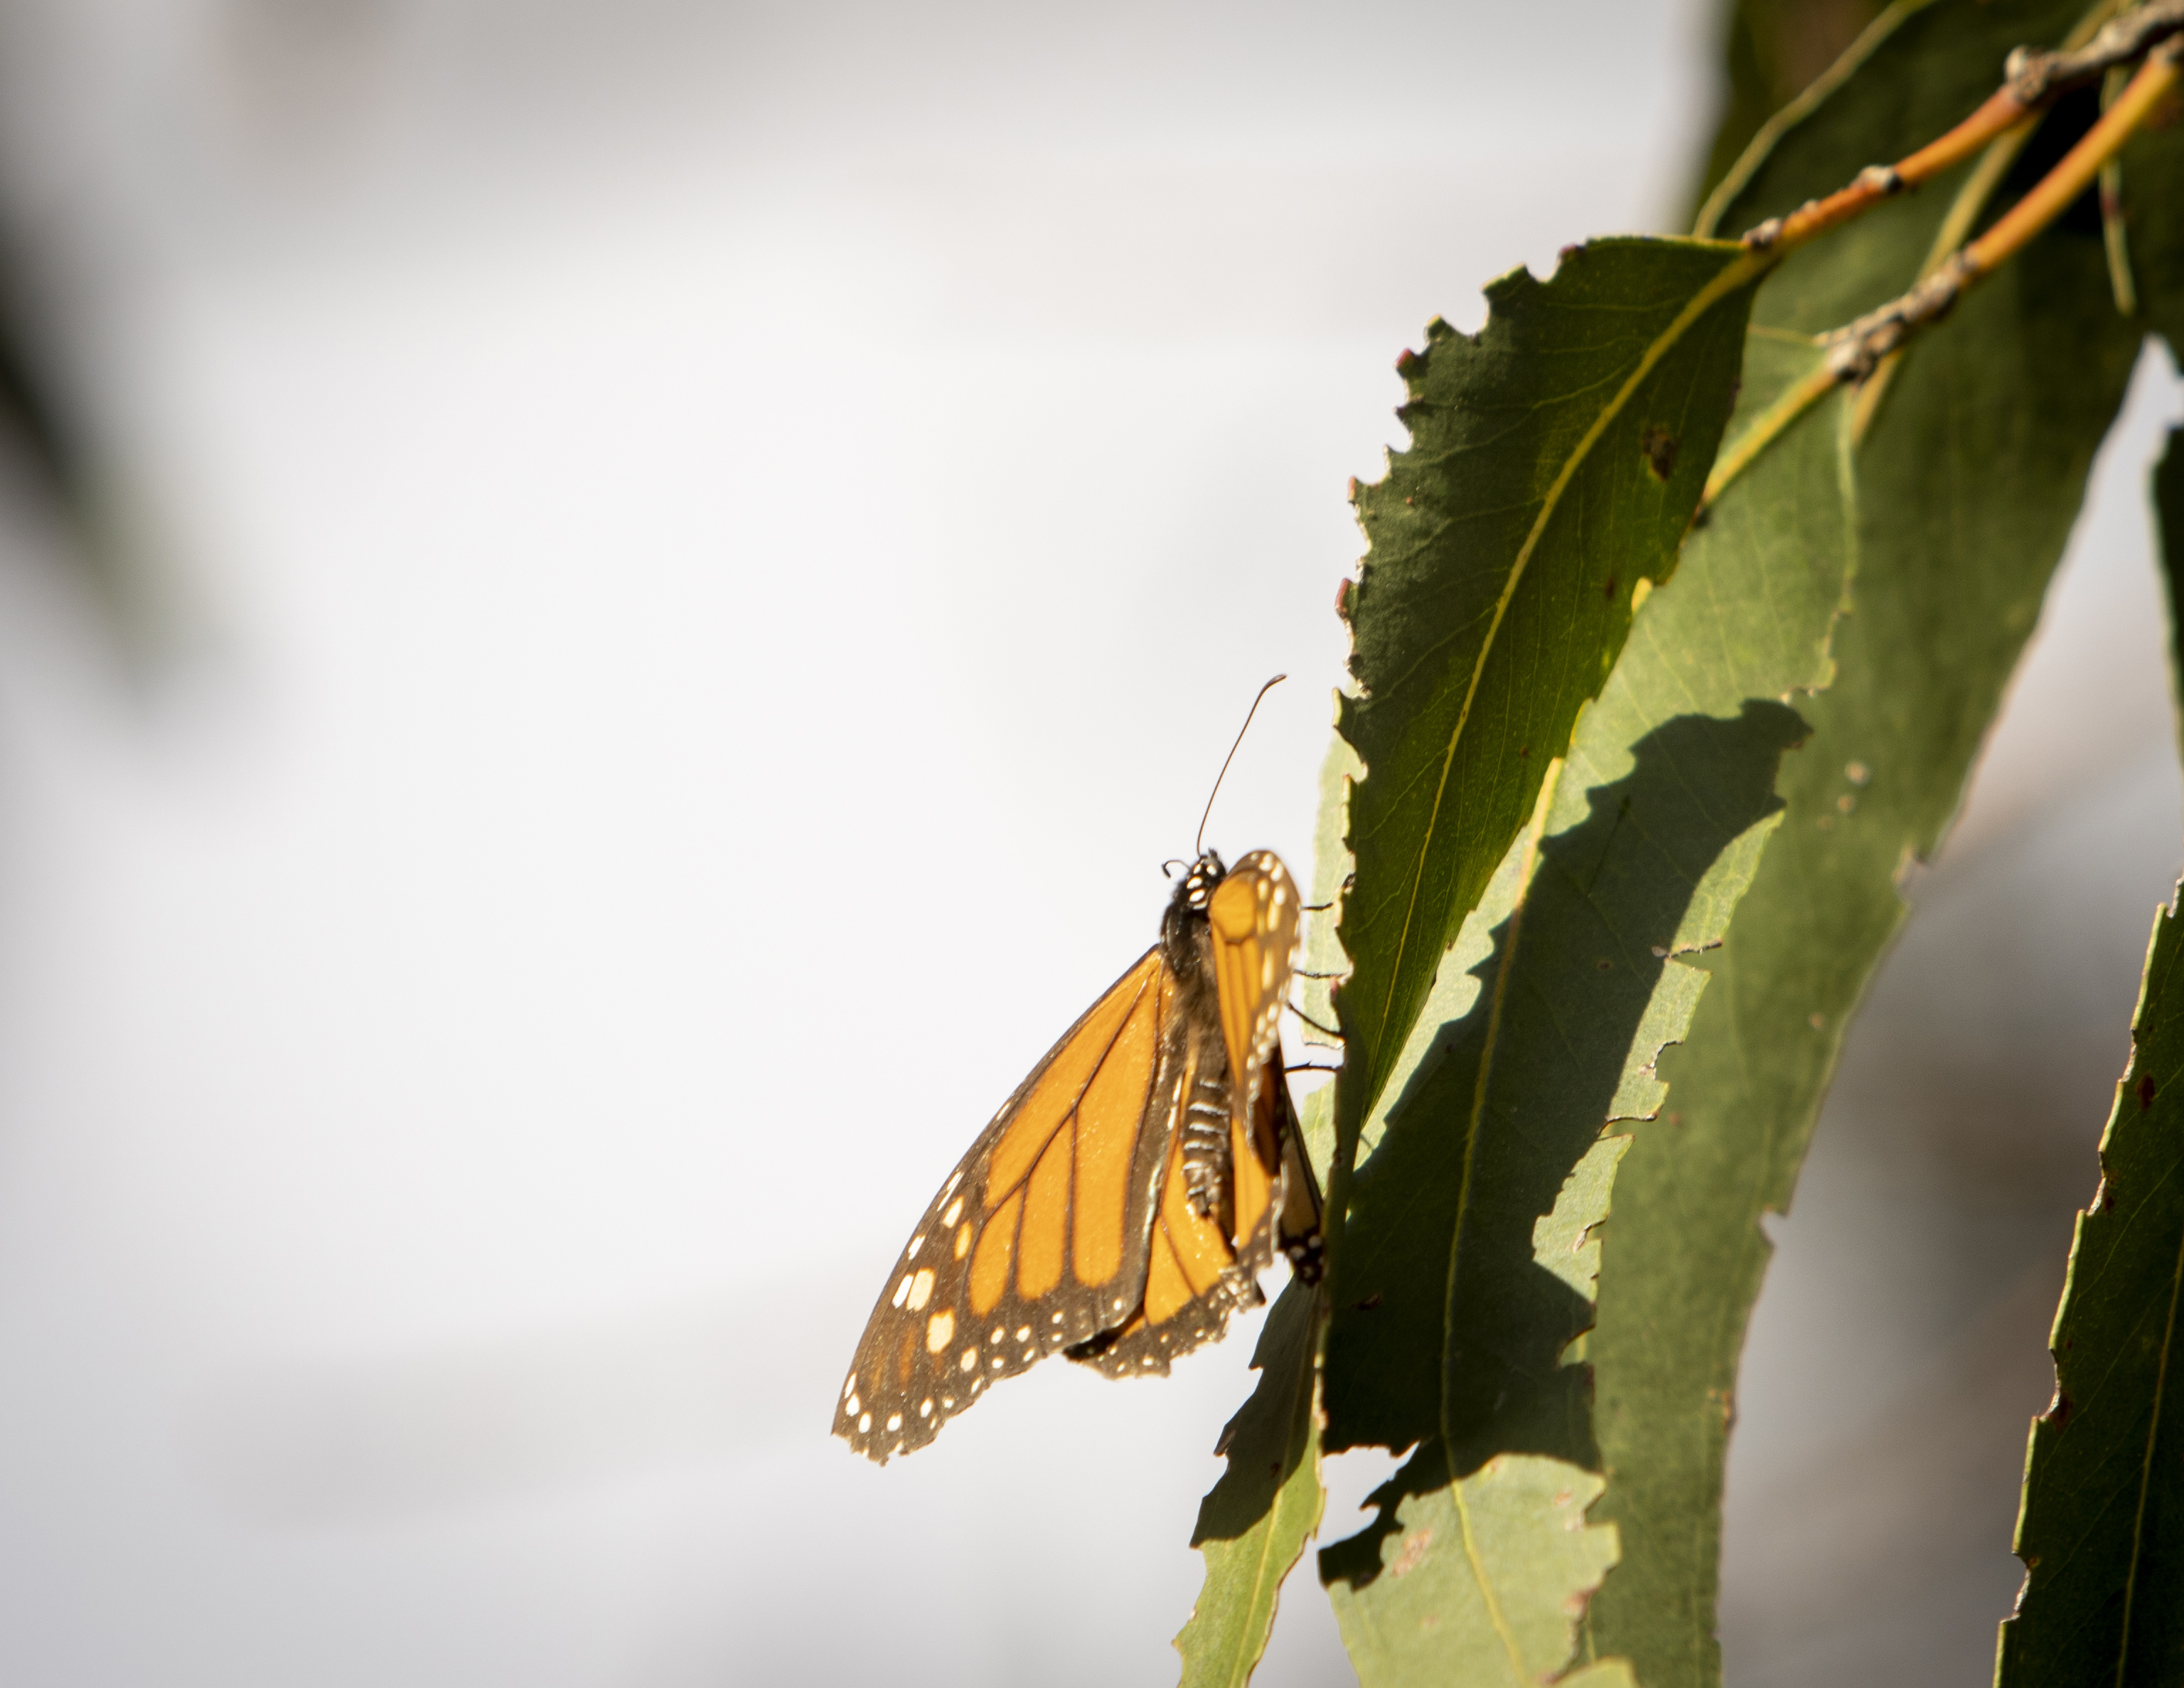 As monarch butterflies gear up to fly south for winter, New